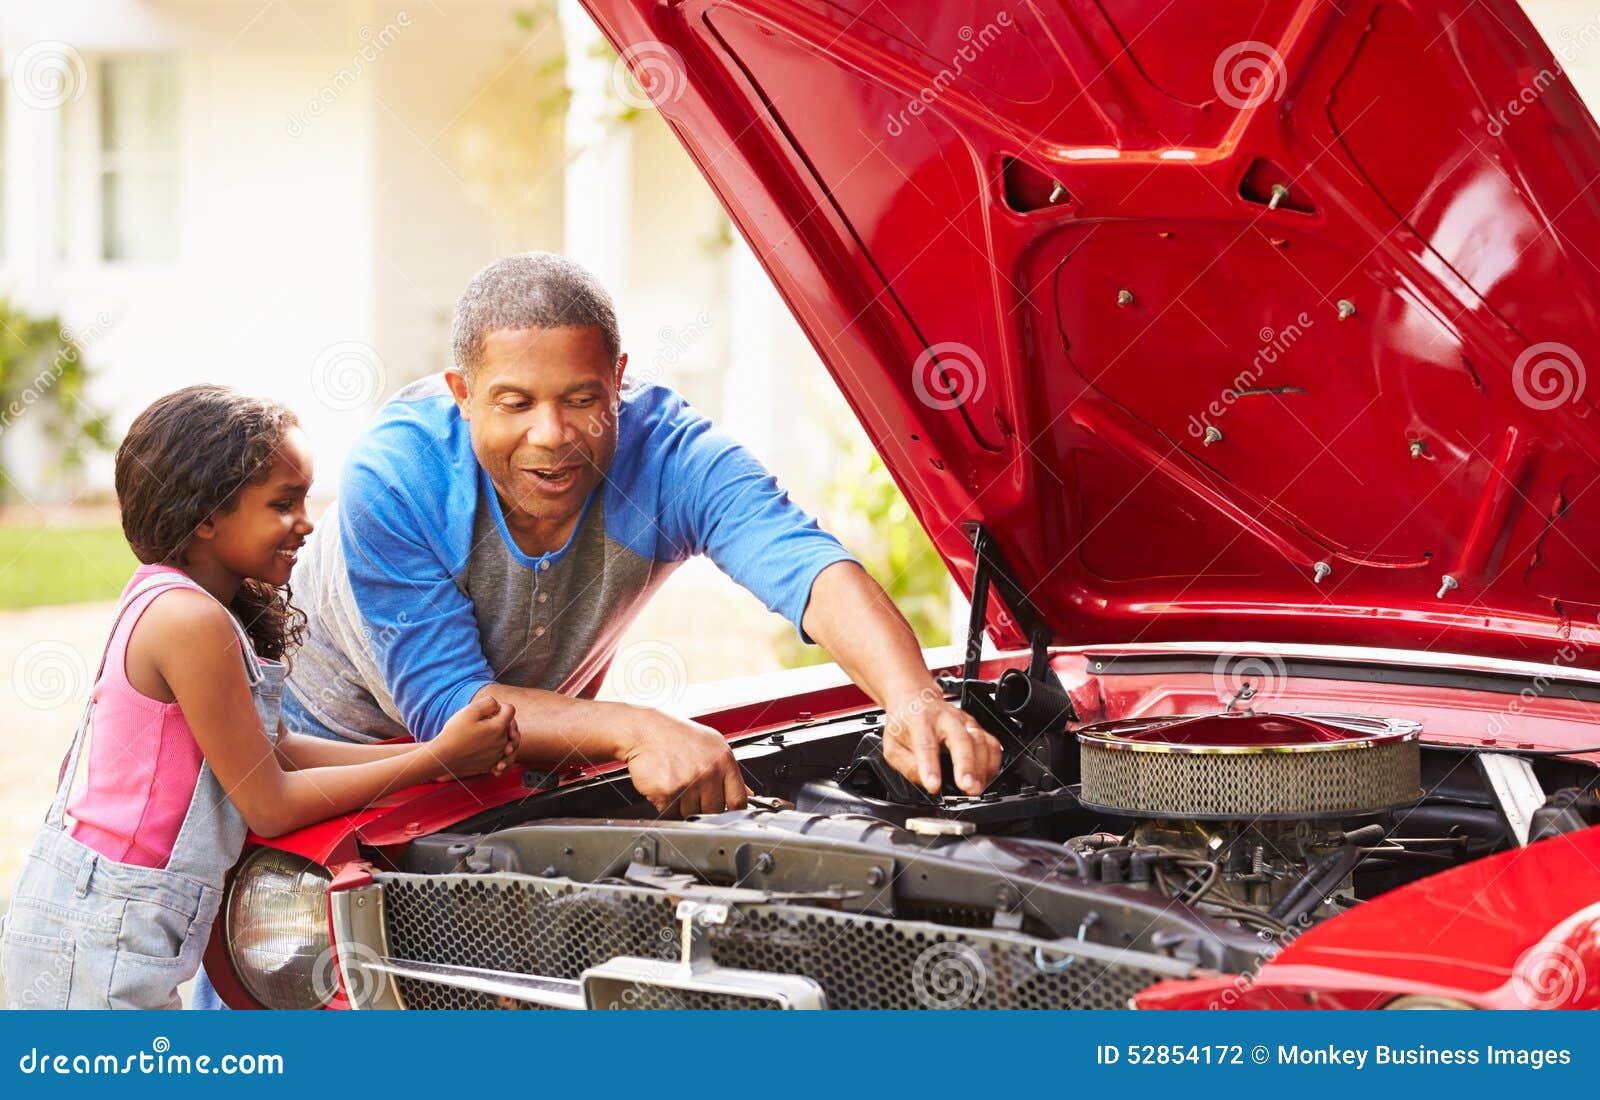 grandfather and granddaughter working on restored car